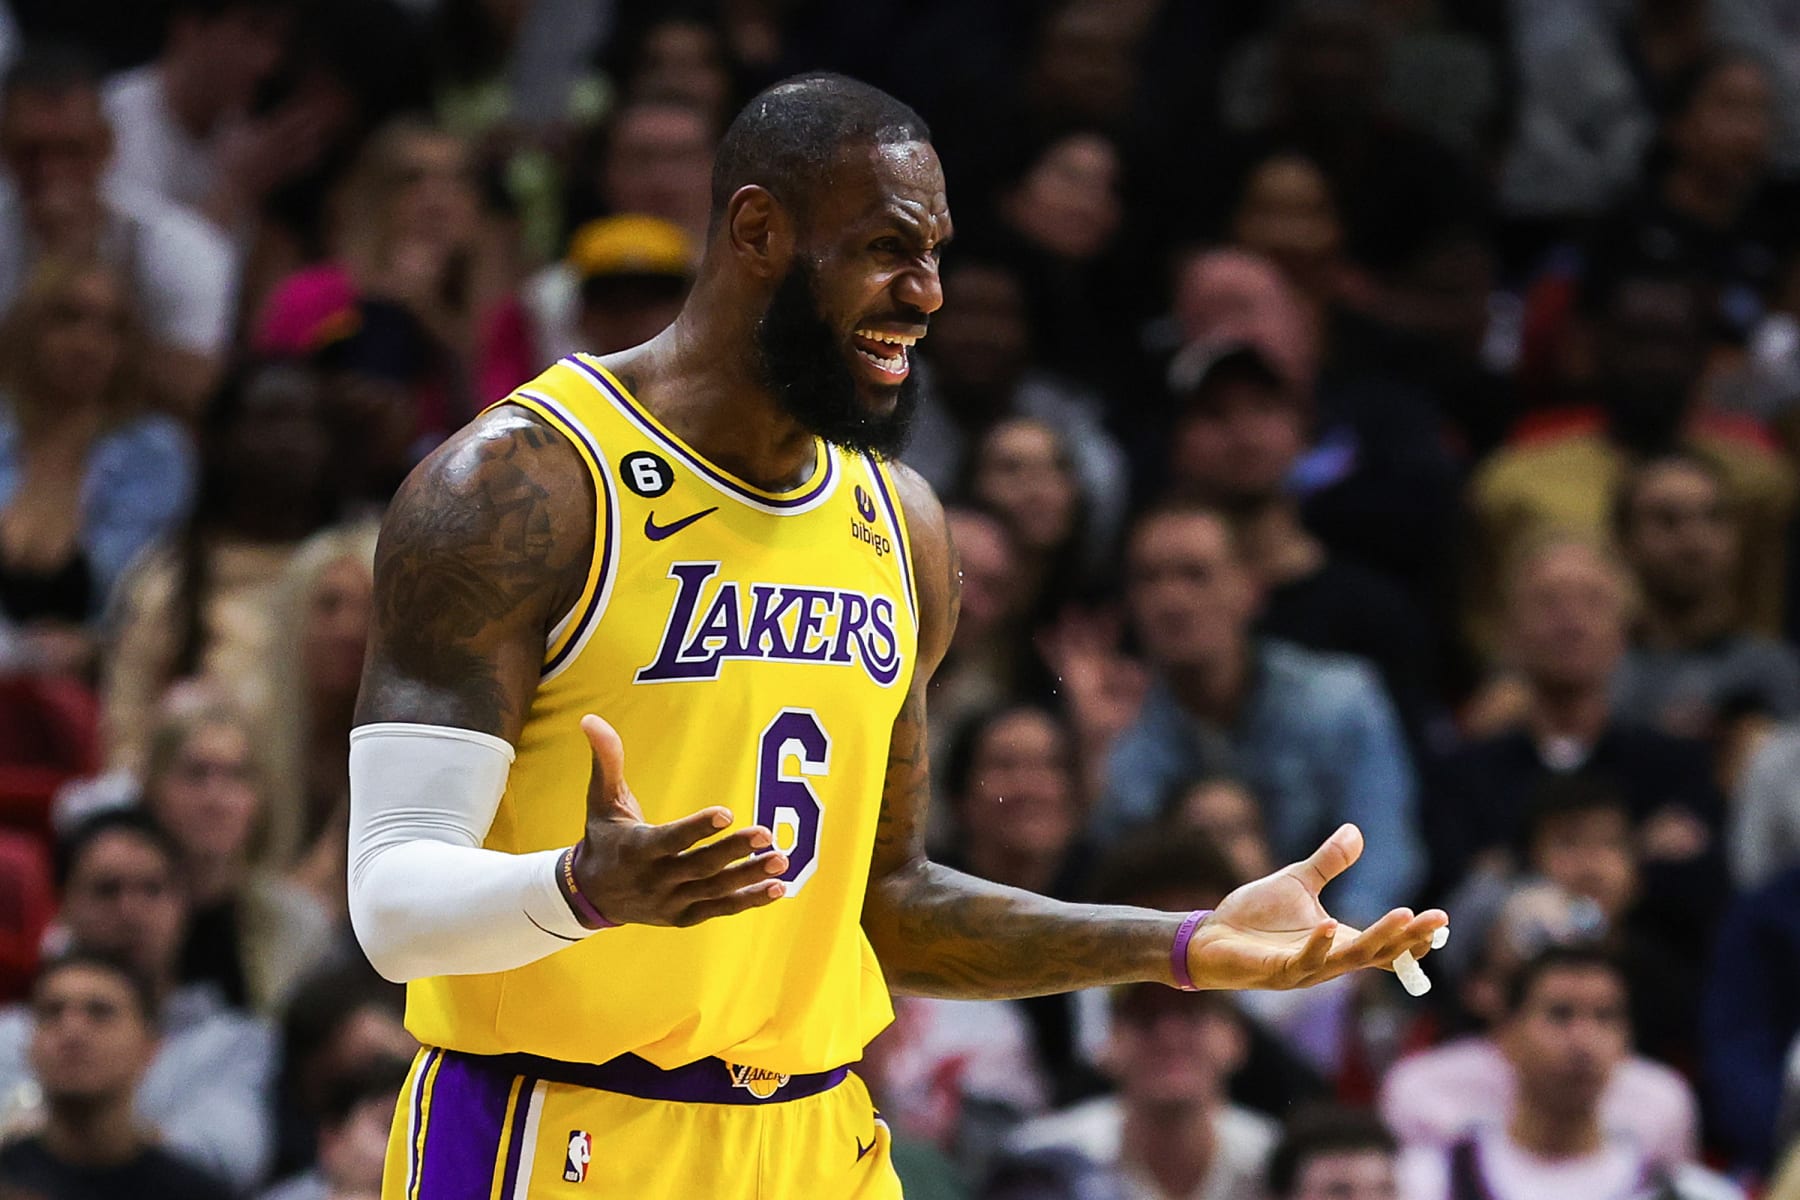 We'll see what happens': LeBron James casts doubt over NBA future after  loss, LeBron James